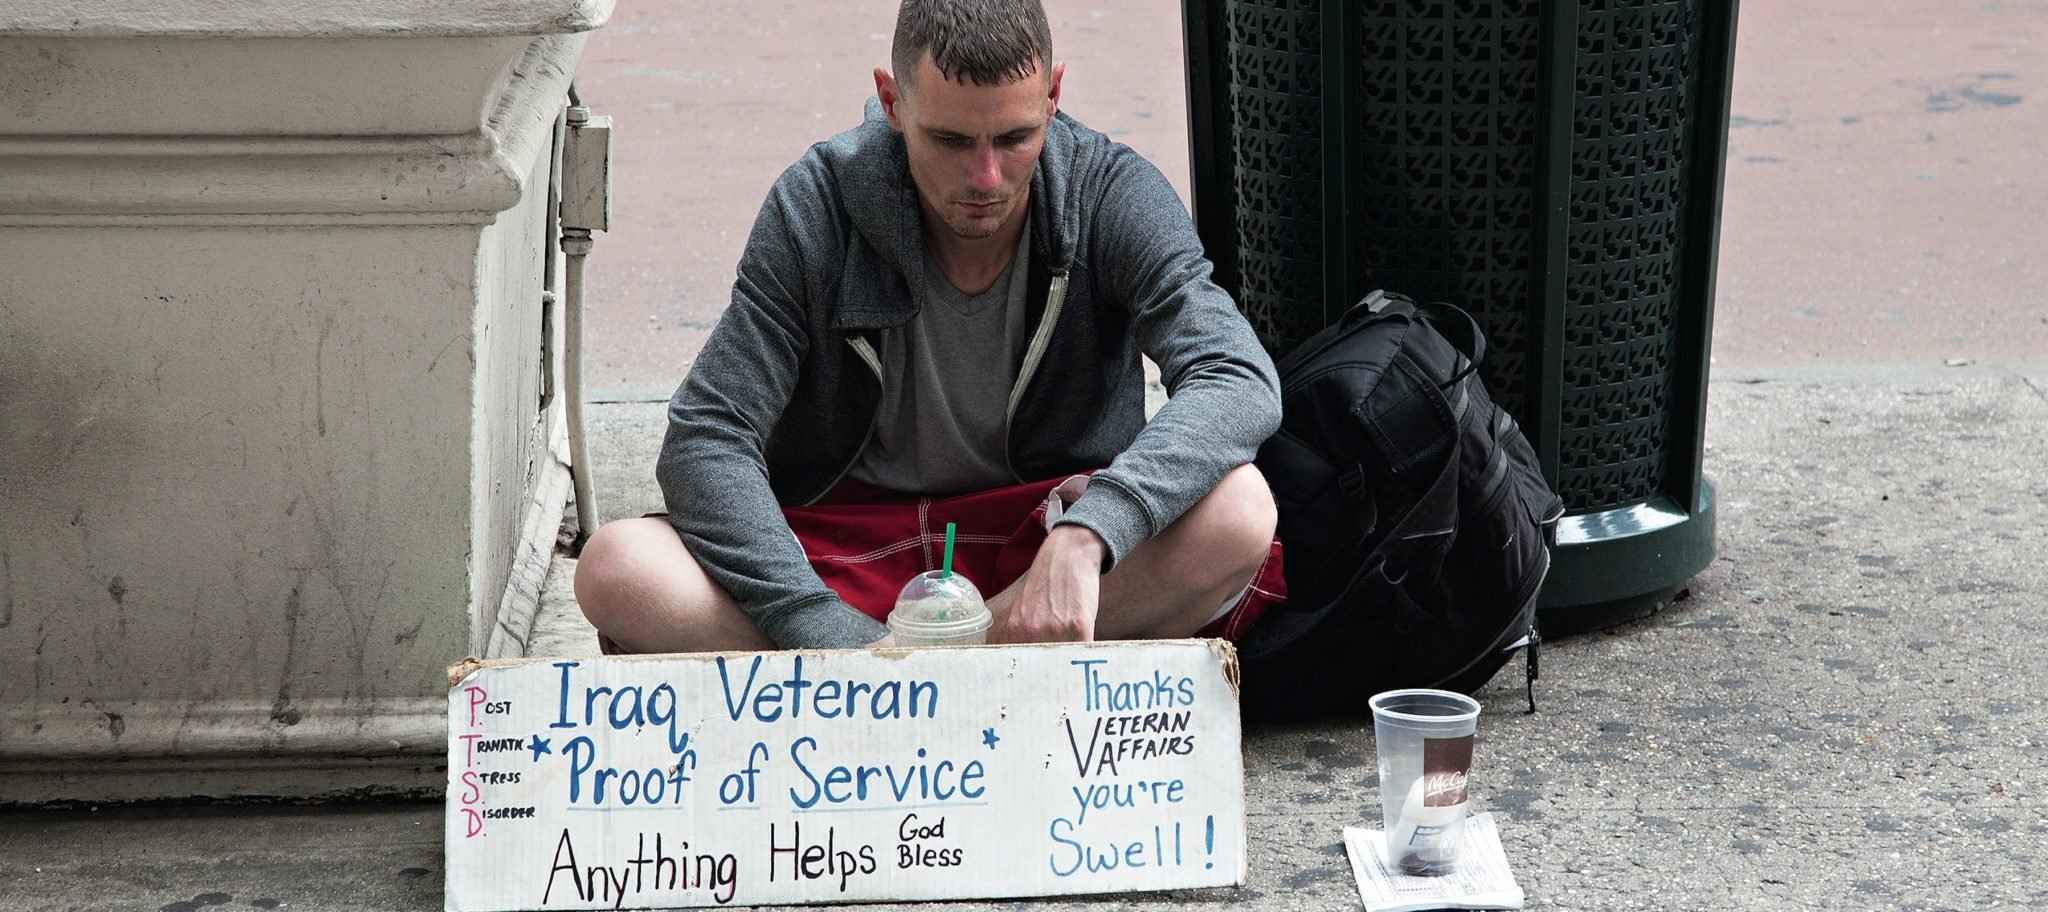 Homeless veteran with sign